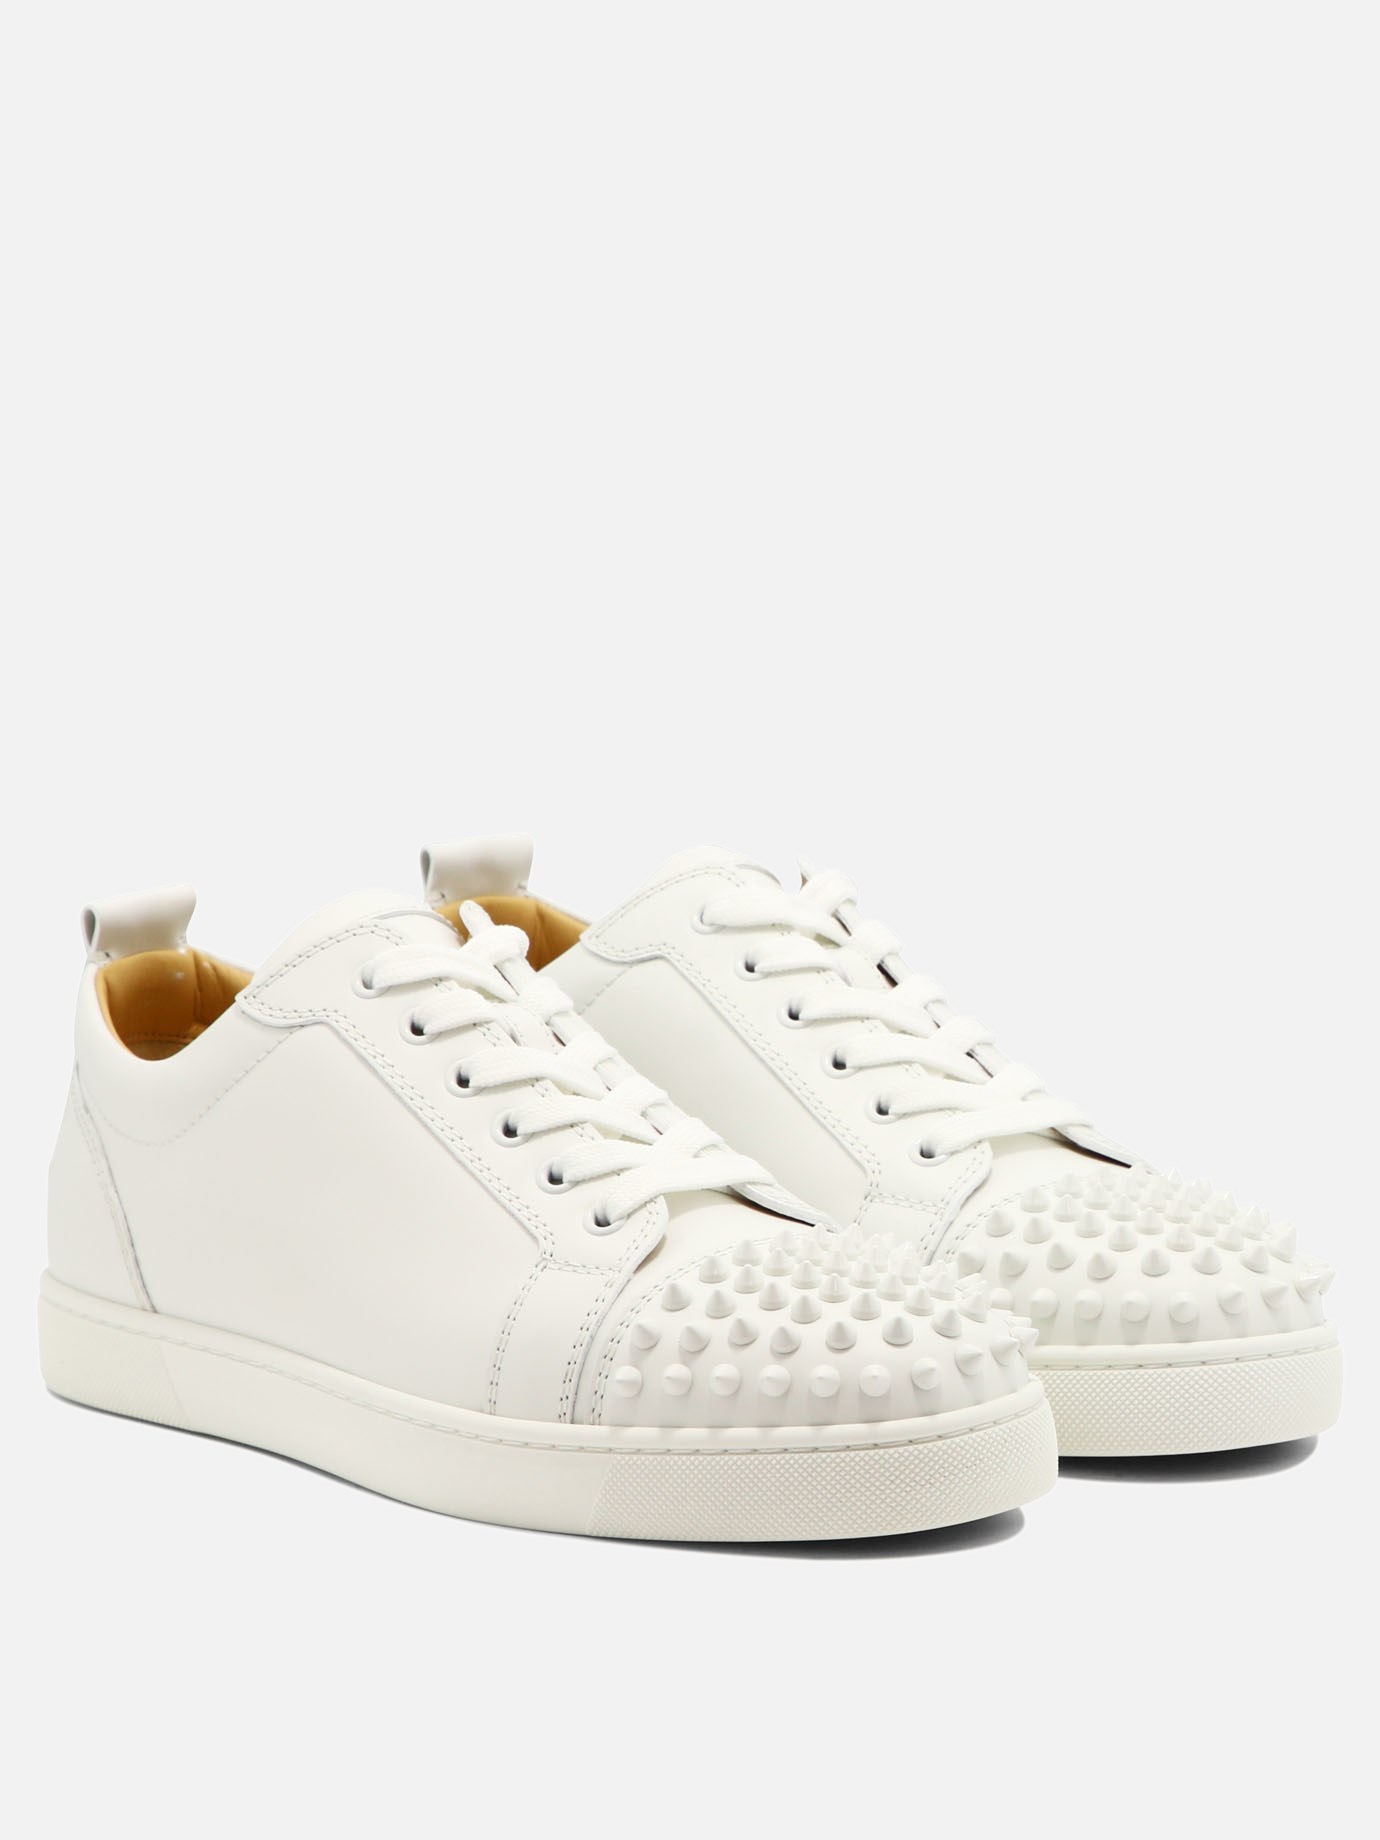  Louis Junior Spikes  sneakers by Christian Louboutin